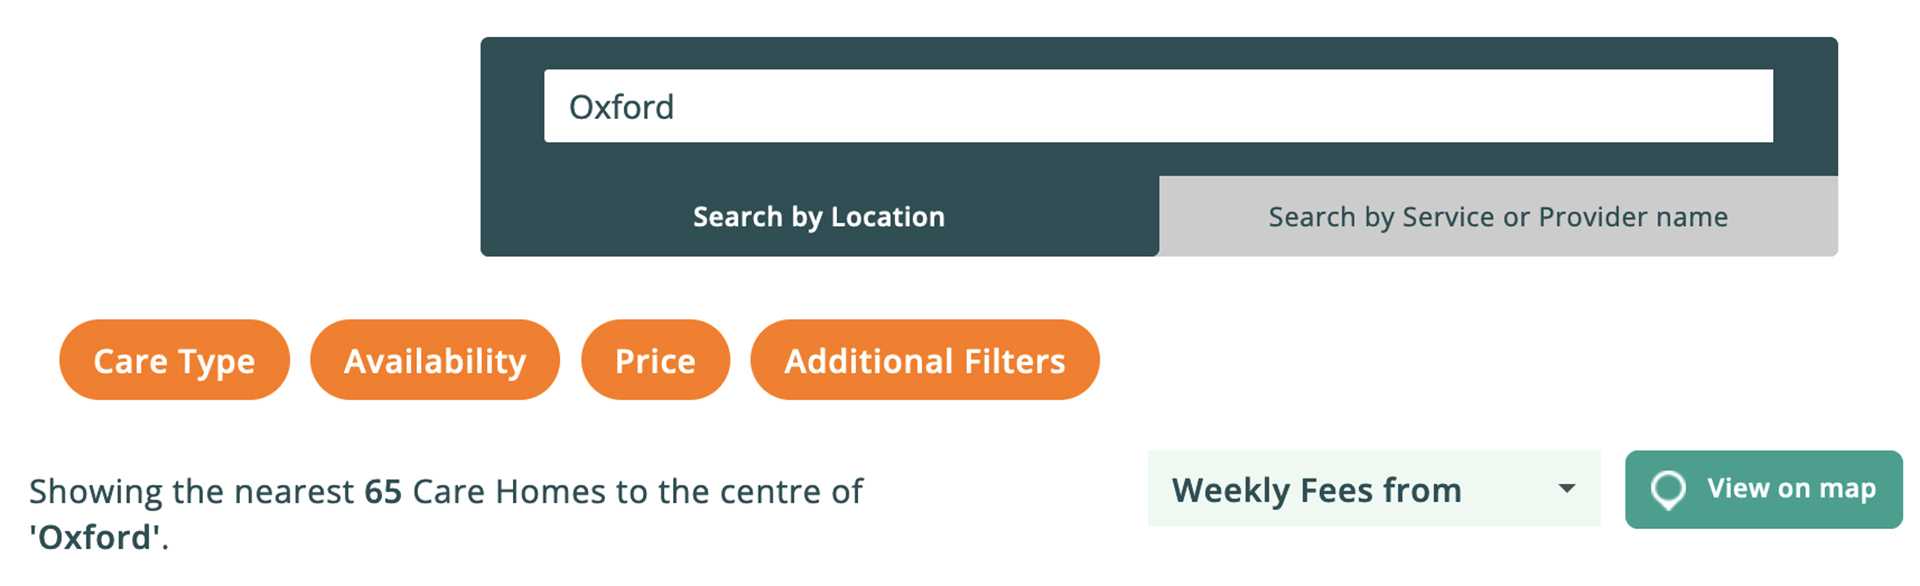 Screenshot showing a search for care homes in Oxford on Autumna